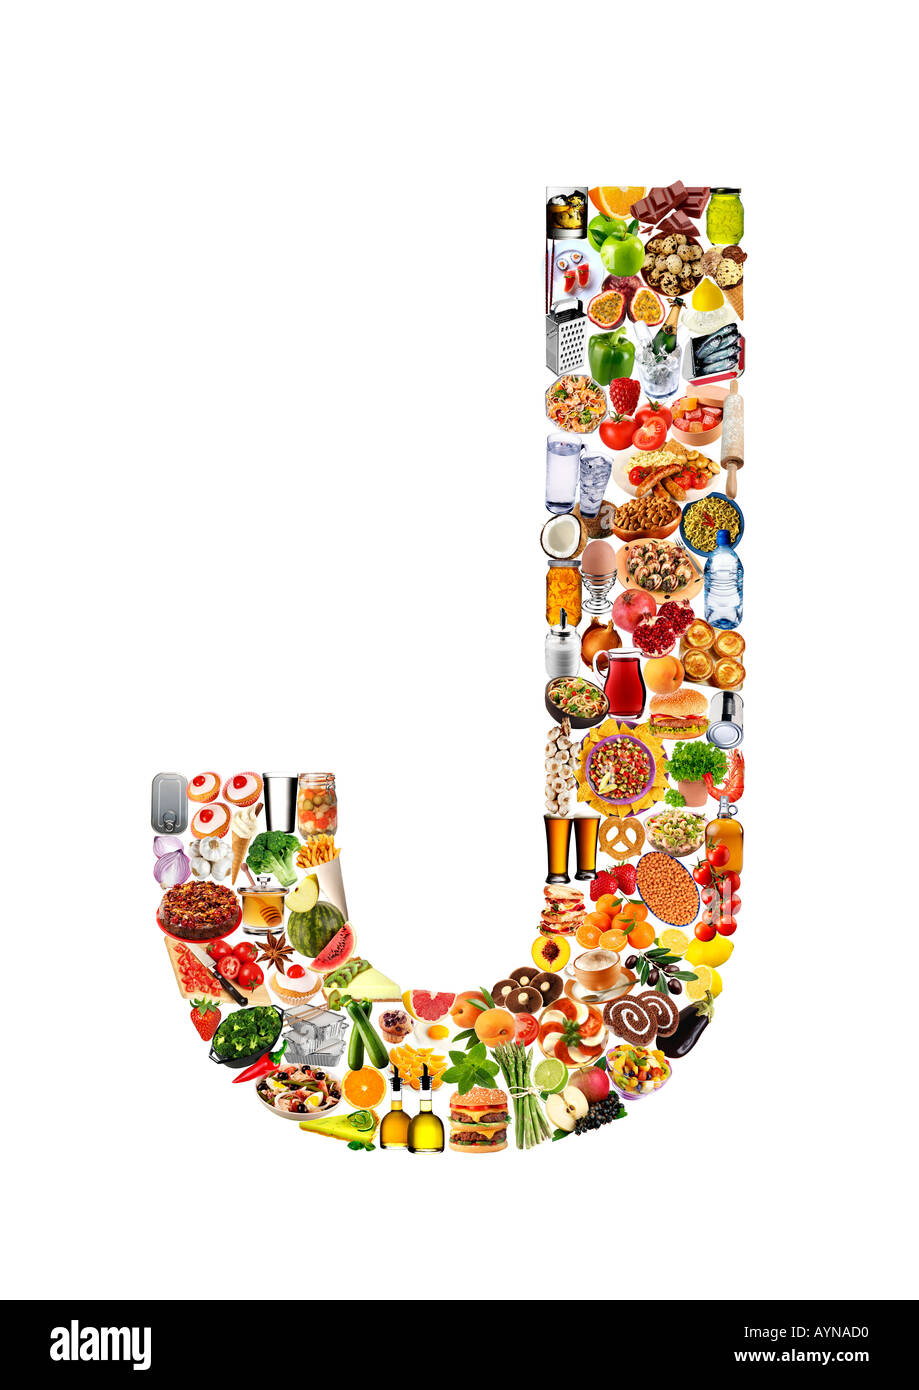 FOODFONT LETTER J ON WHITE Stock Photo